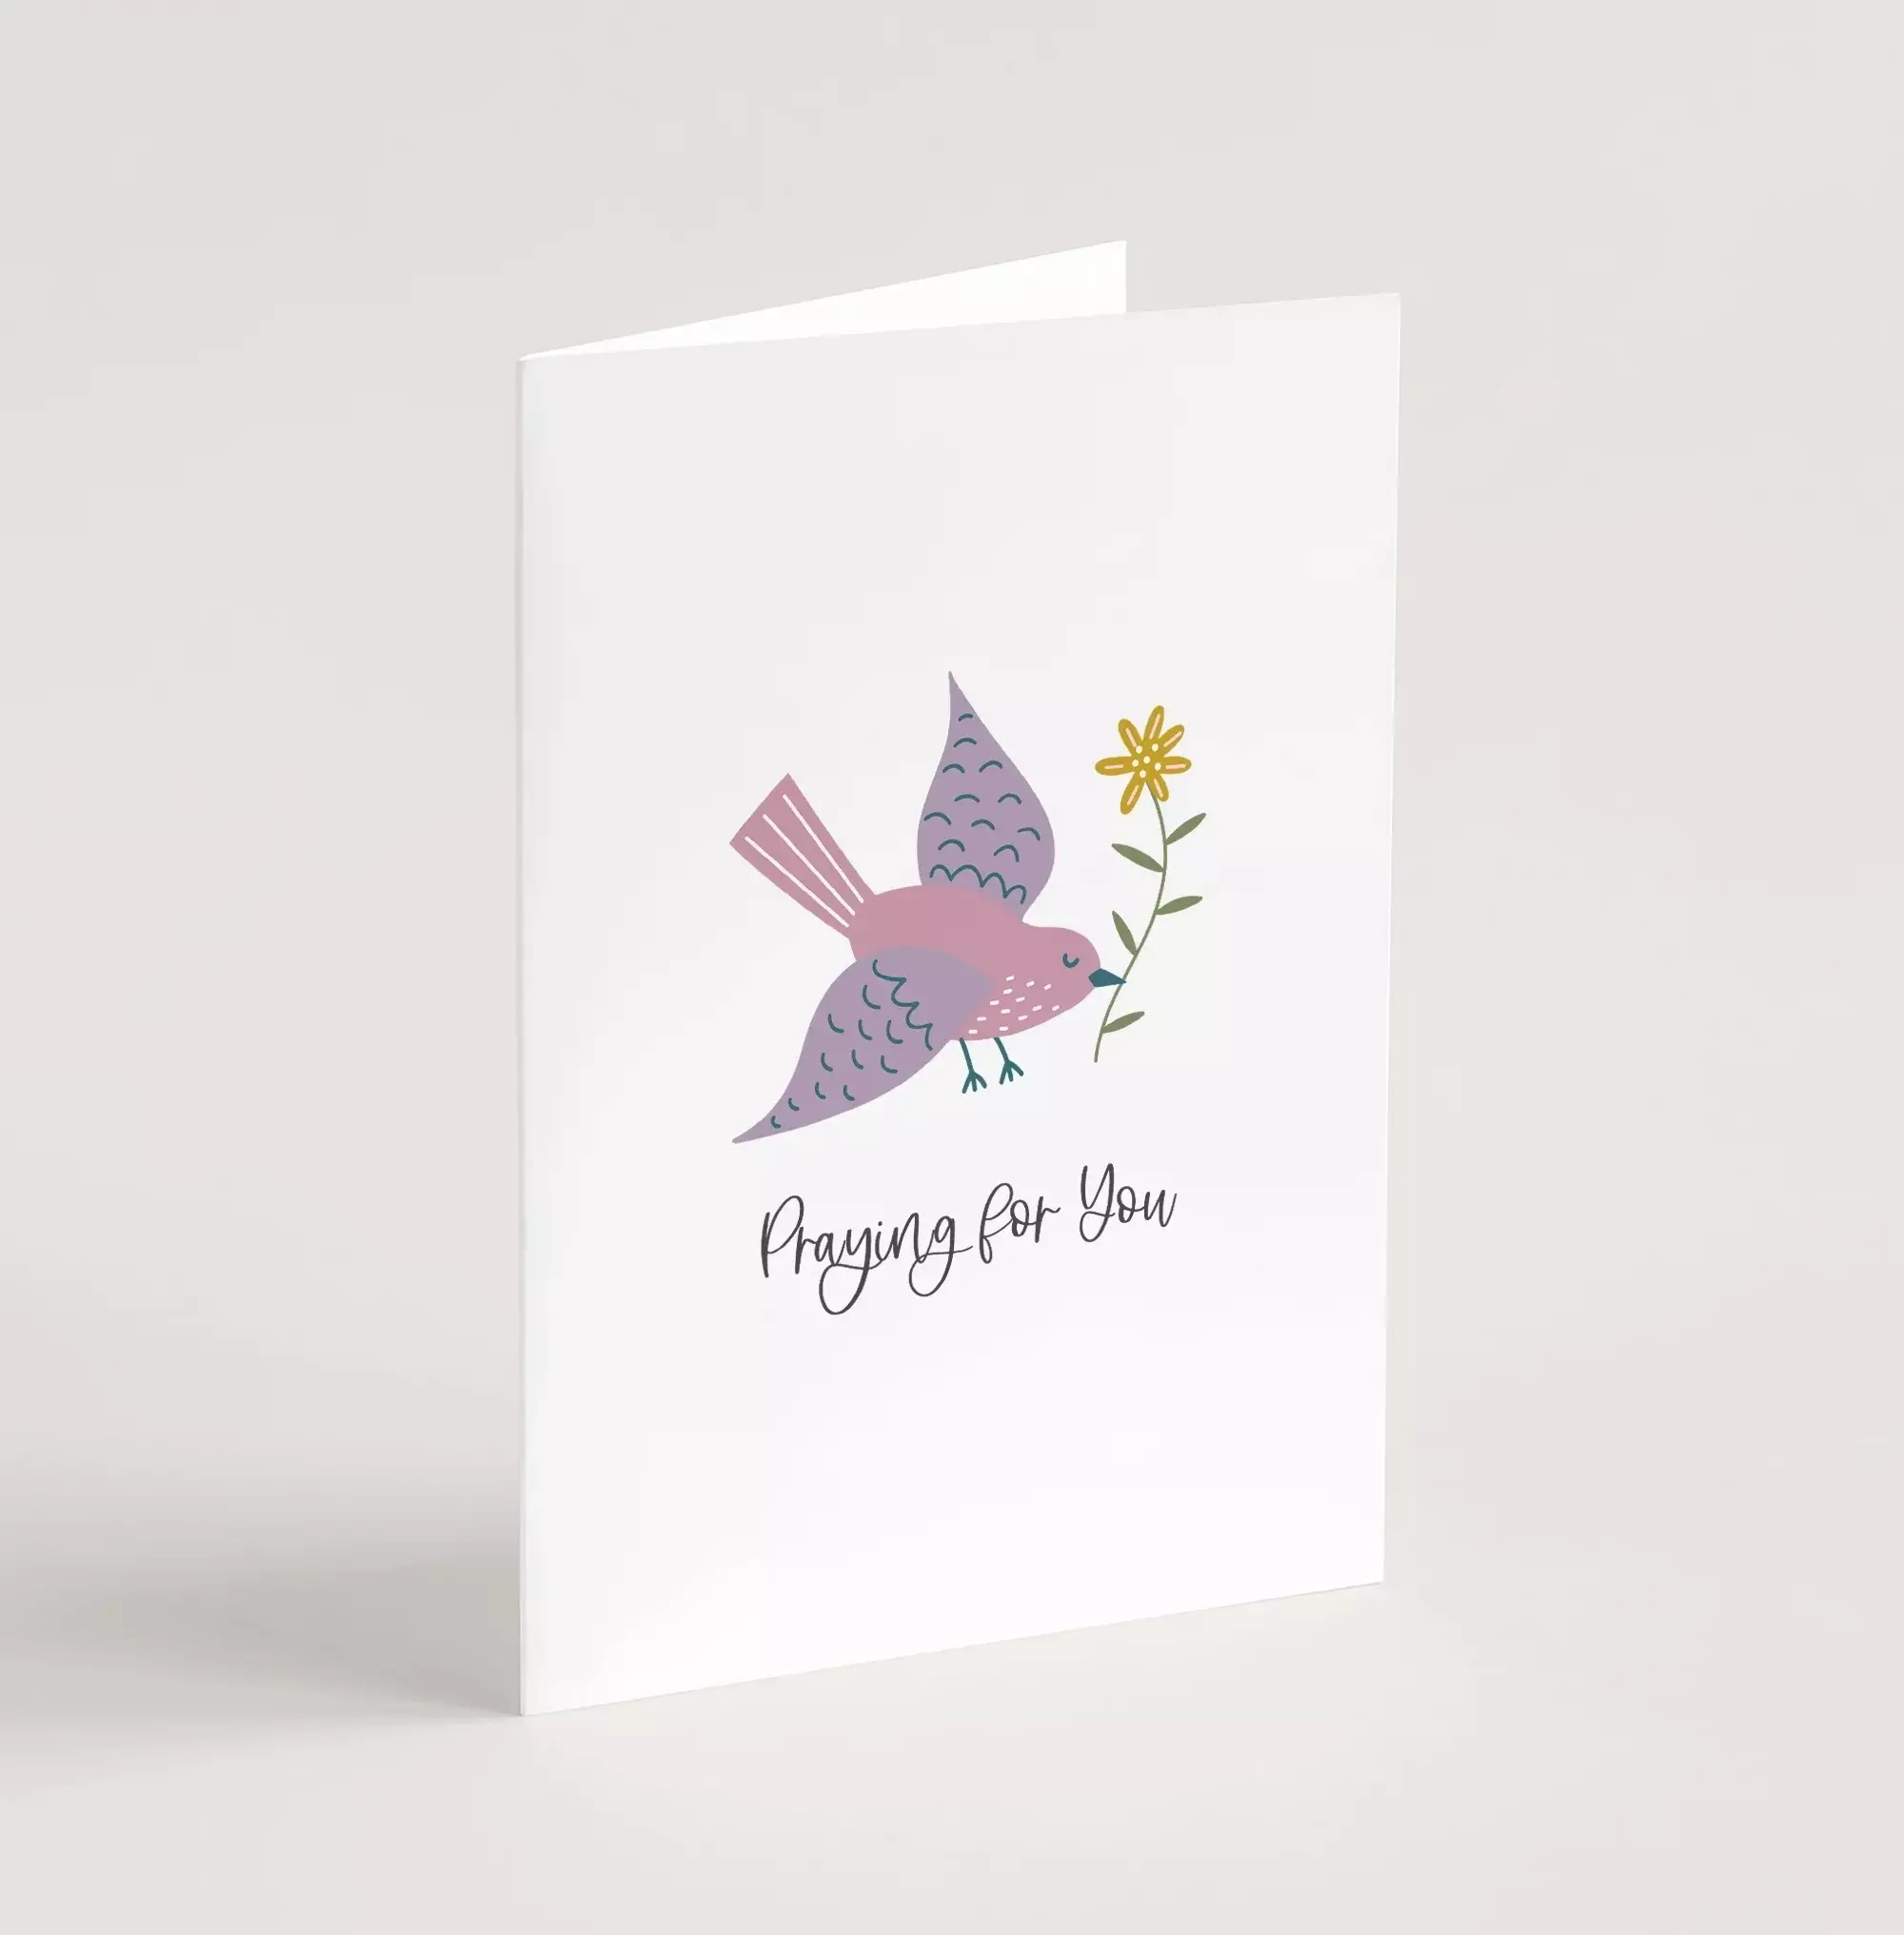 'Praying for You' (Birds of Joy) with bible verse A6 Greeting Card